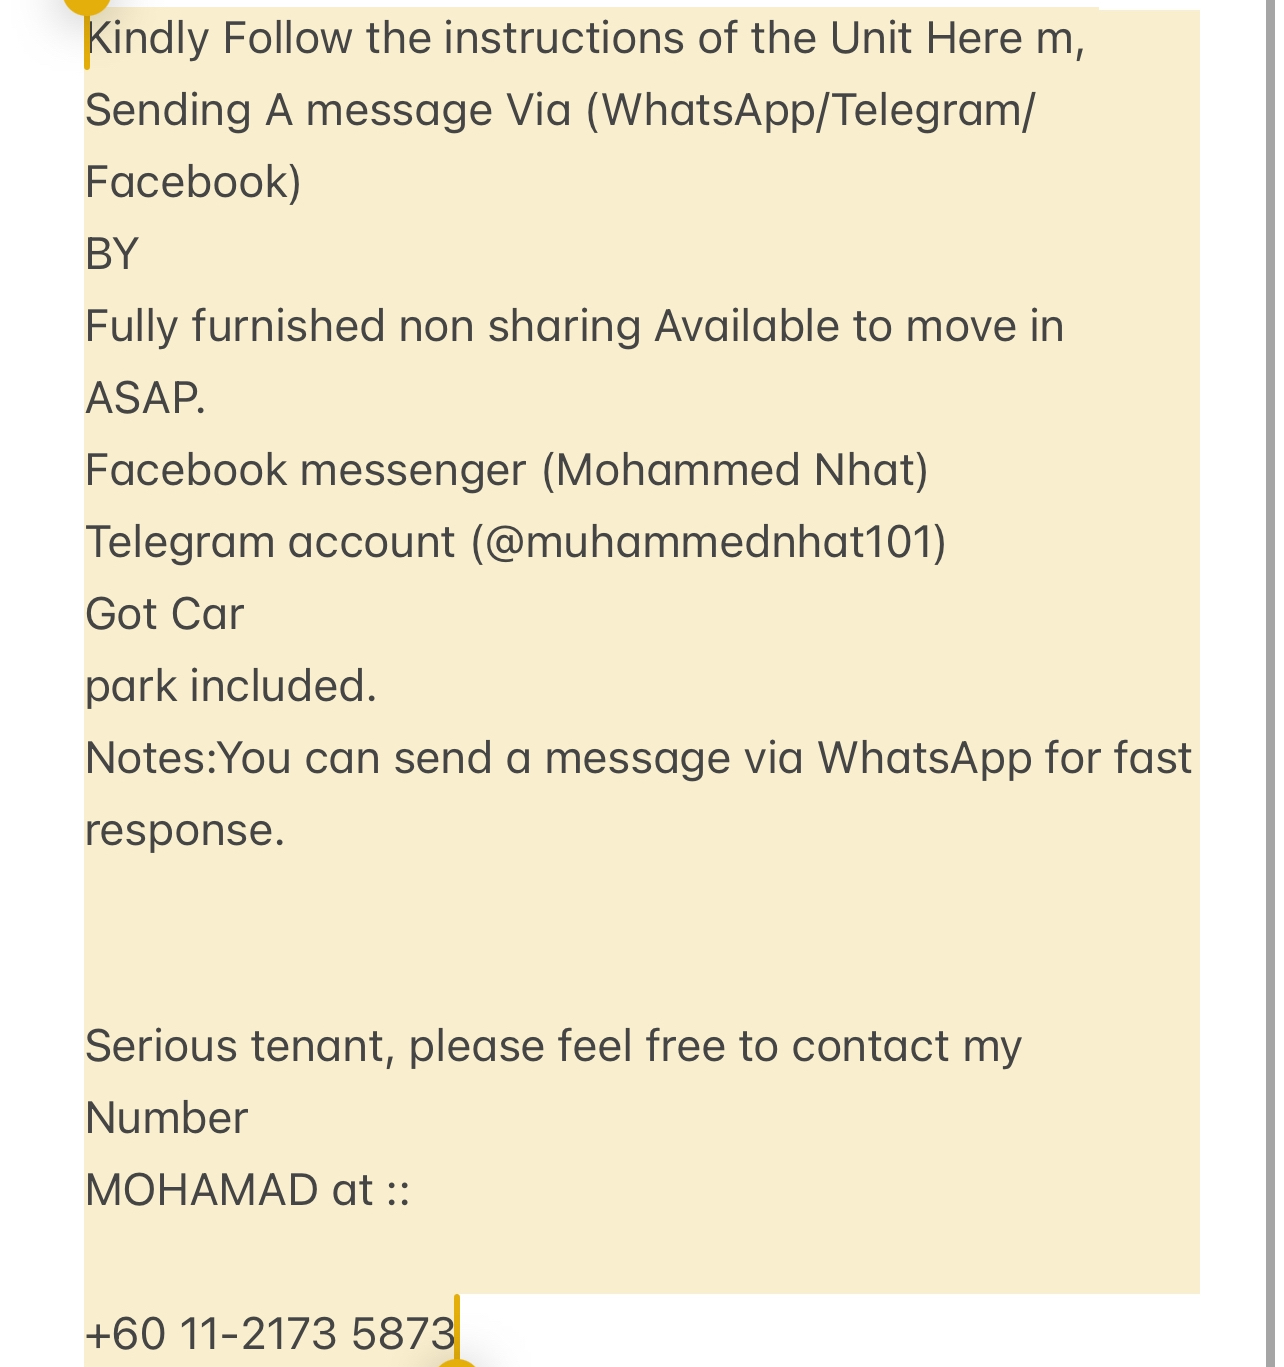 room for rent, studio, kampung babah, Send the owner a message on WhatsApp/facebook if you want to RENT the unit facebook (Mohammed Nhat)&Telegram(@muhammednhat101) Fully furnished non sharing :(comfortable)